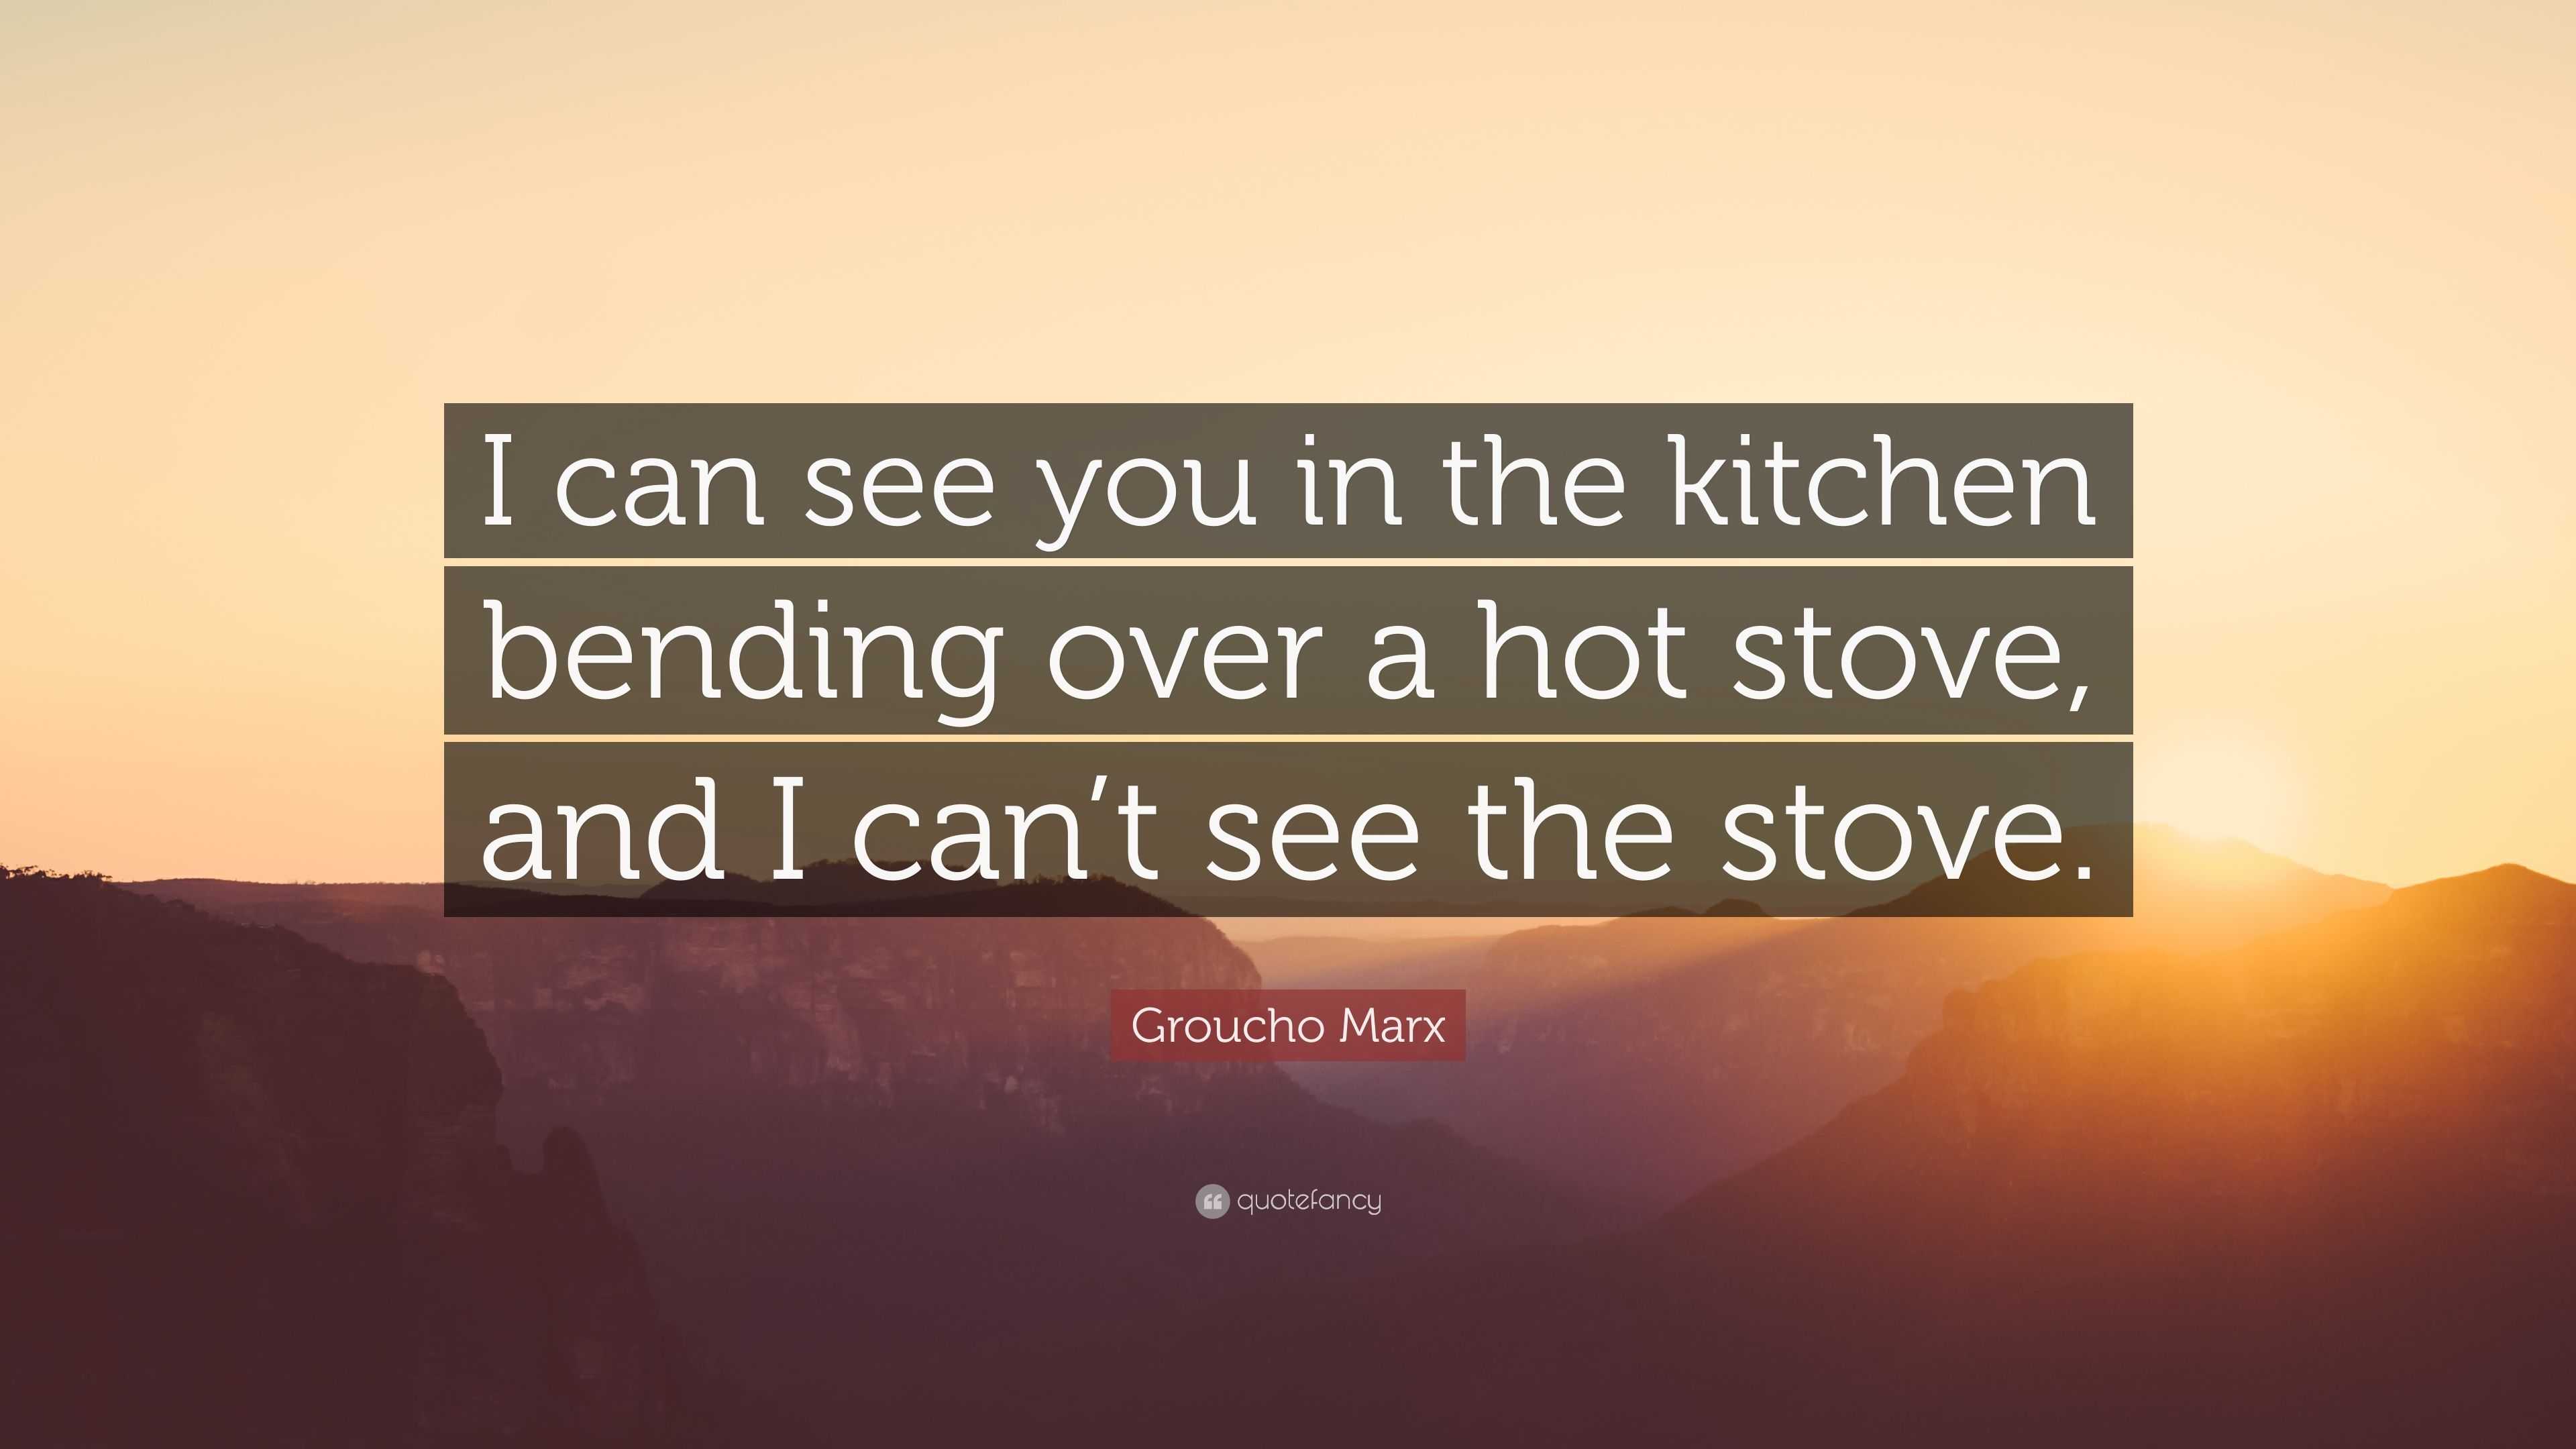 4954845 Groucho Marx Quote I can see you in the kitchen bending over a hot